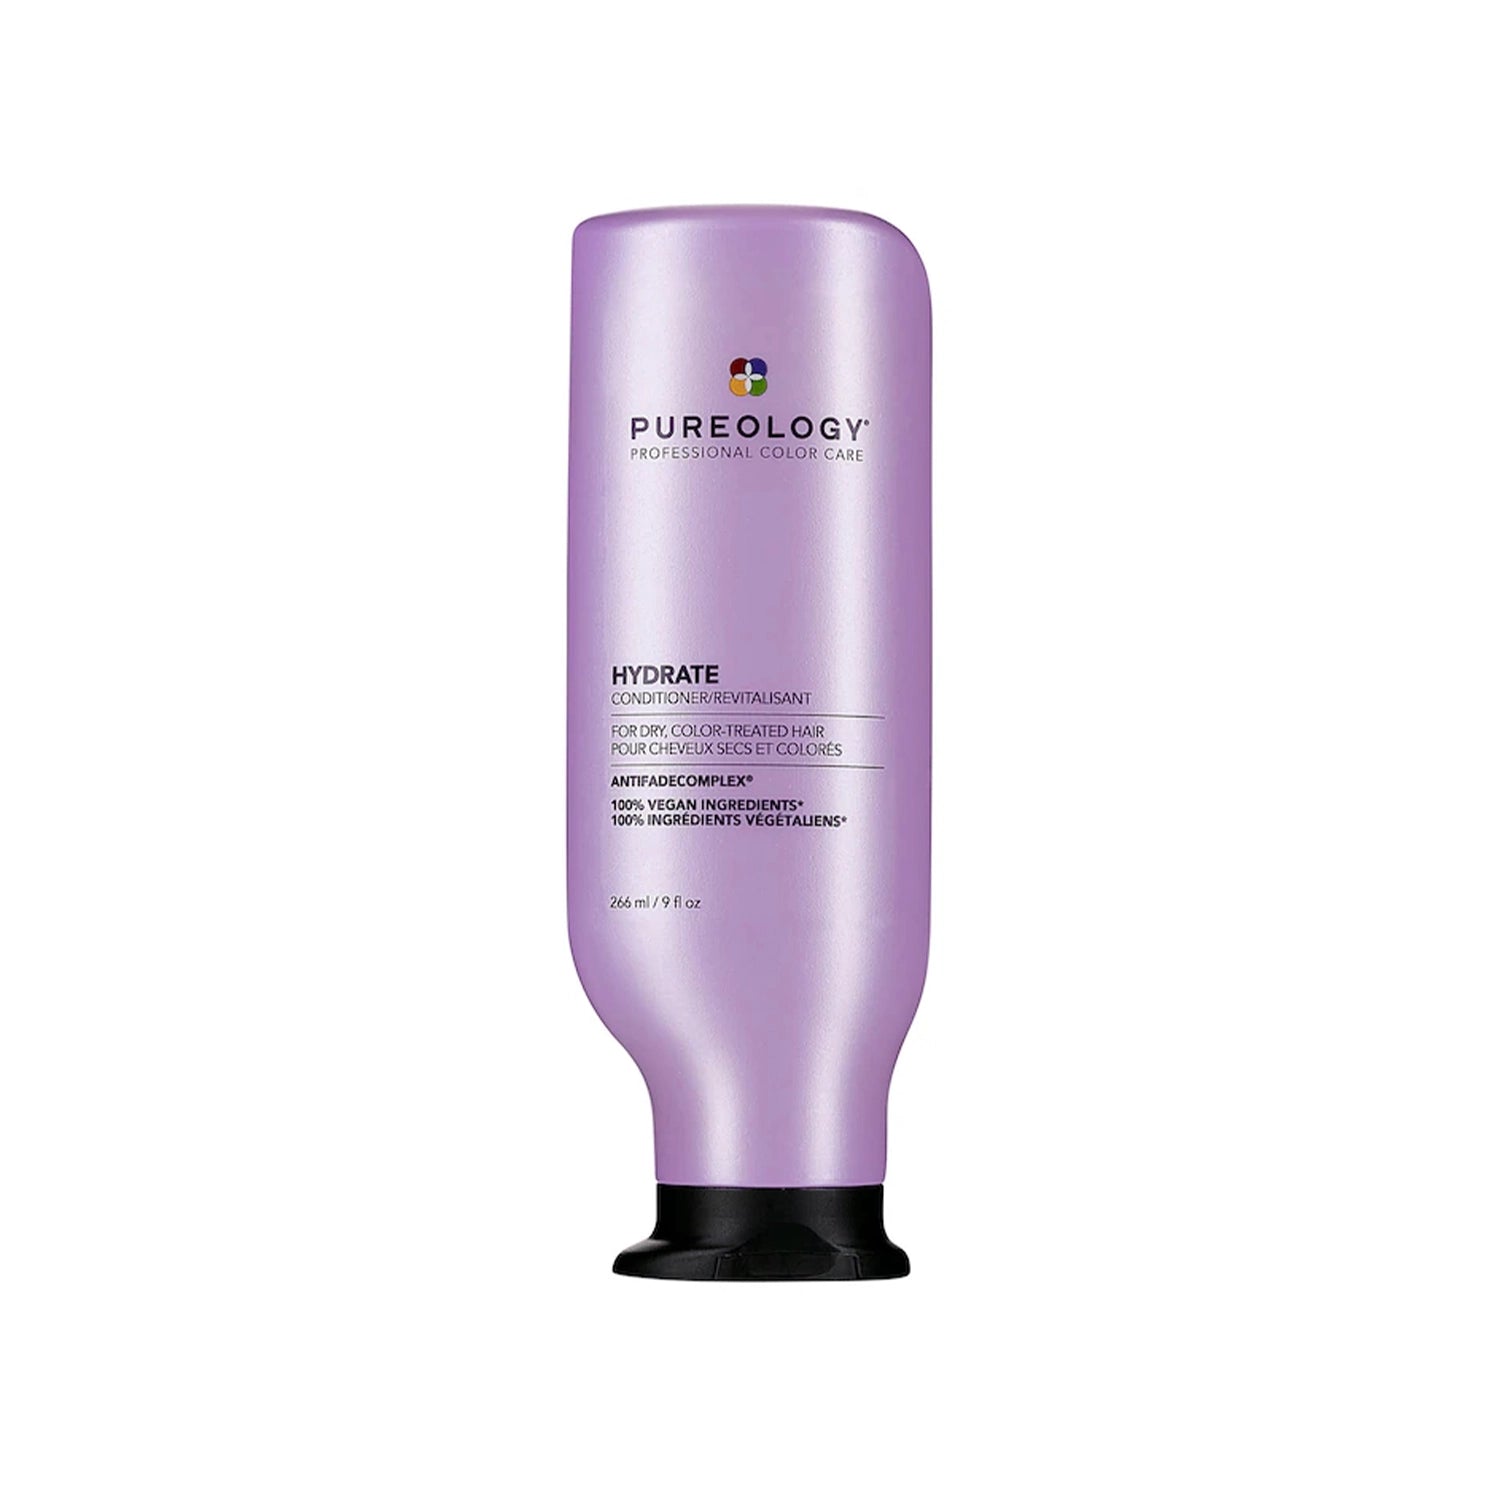 Pureology - Hydrate Conditioner, 266ml 